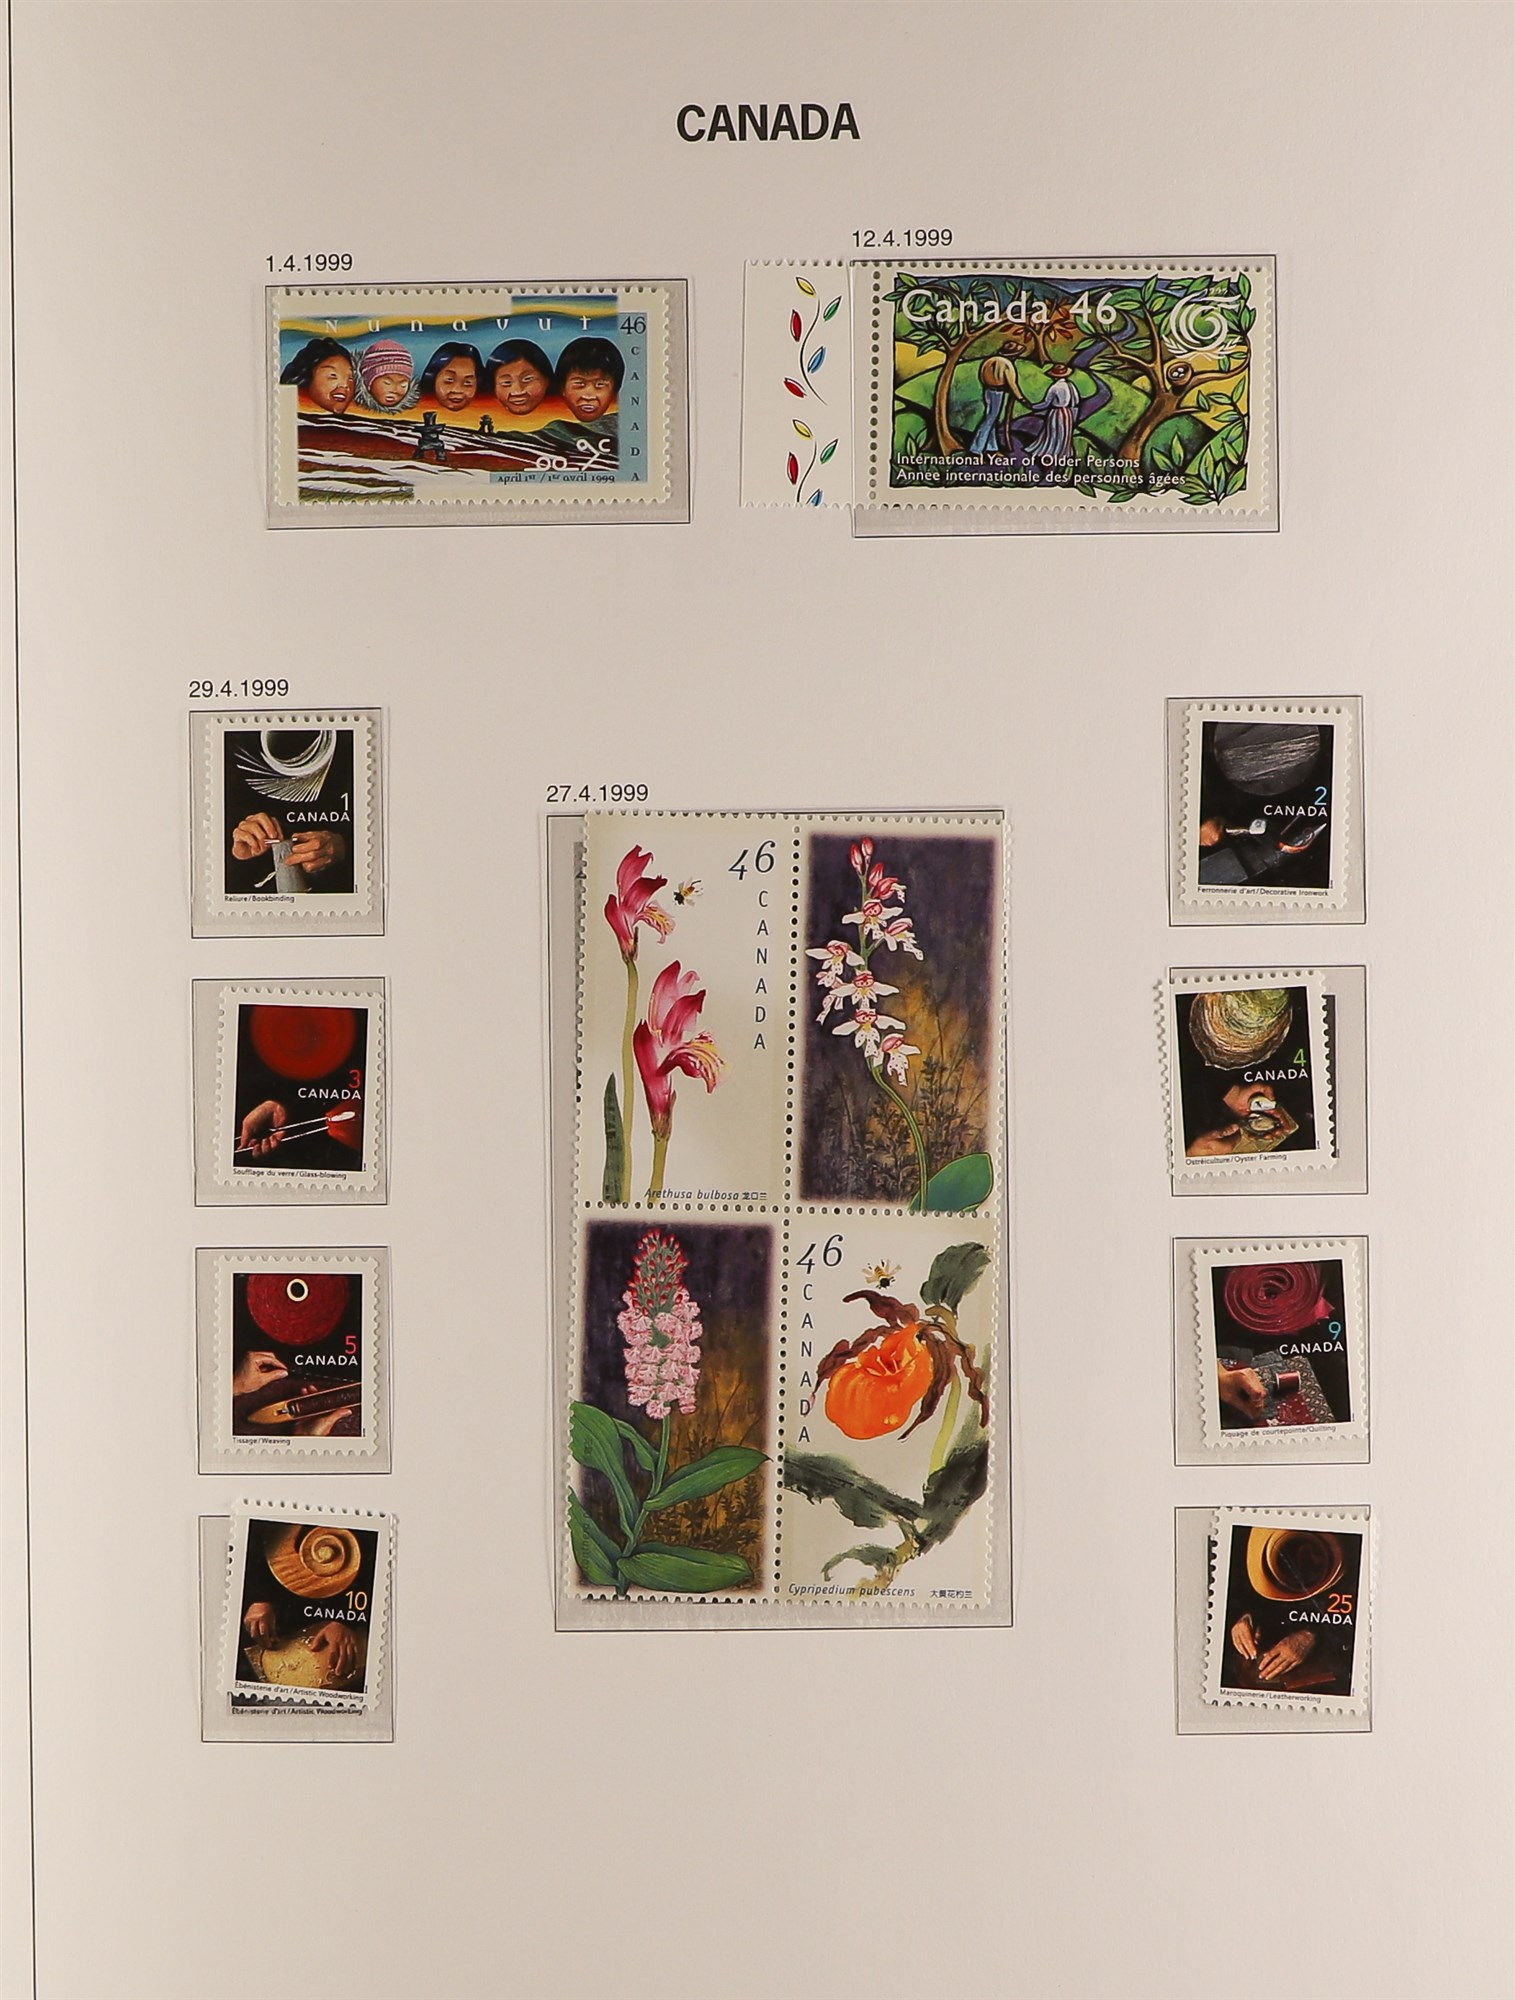 CANADA 1990 - 2002 NEVER HINGED MINT COLLECTION in DAVO Canada hingeless album, largely complete ( - Image 7 of 13